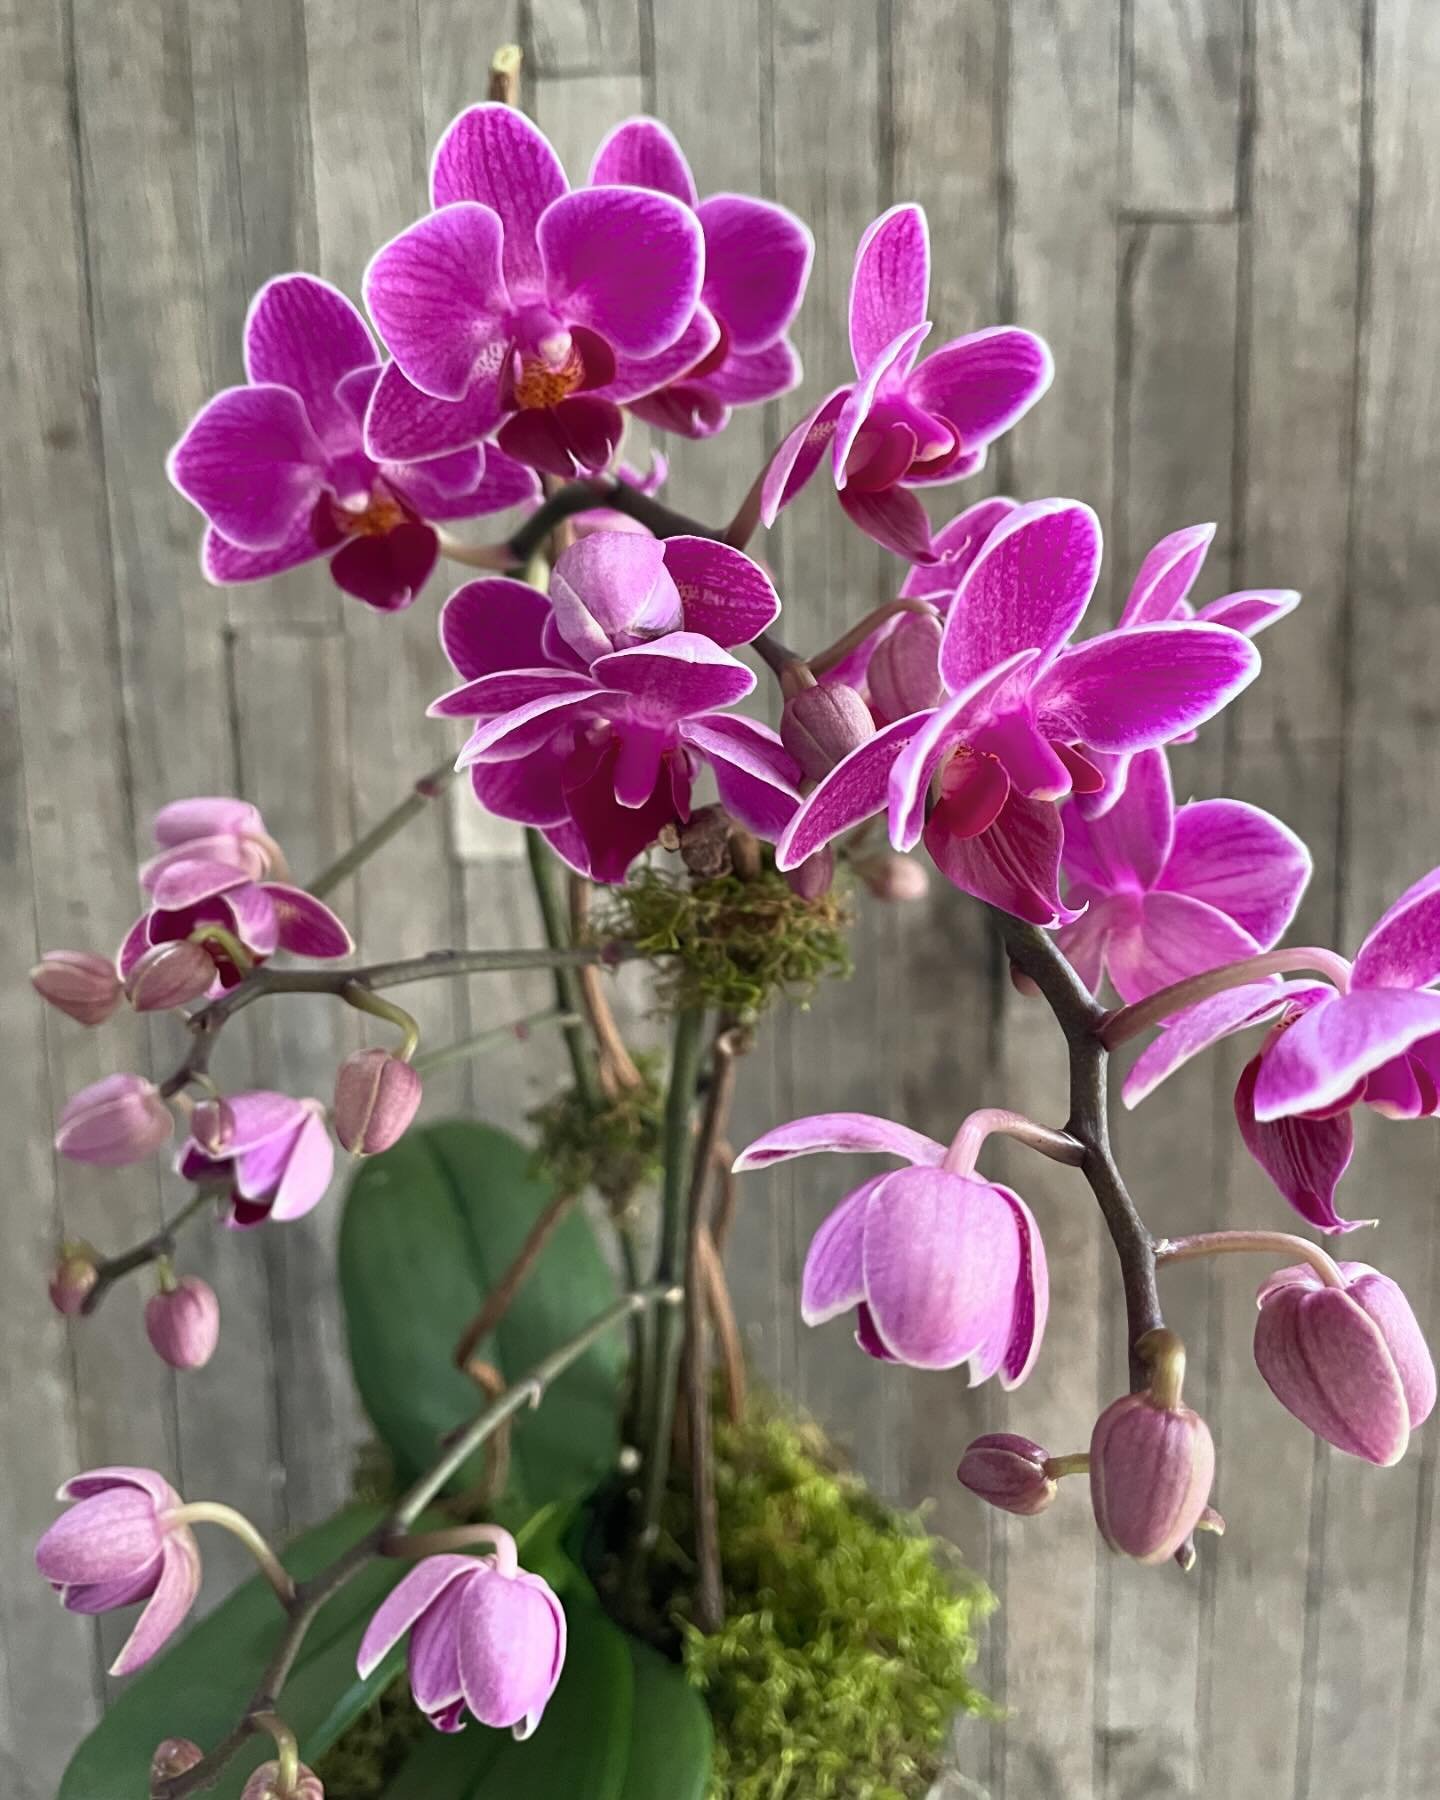 Orchids for the mamas!

We are stocking up on gorgeous varieties for Mother&rsquo;s Day. Various colors, containers, and sizes available.

Call or order online to secure yours today. 

🌸🌸🌸 

#orchid #mothersdaygift #gardendesign #phalaenopsis